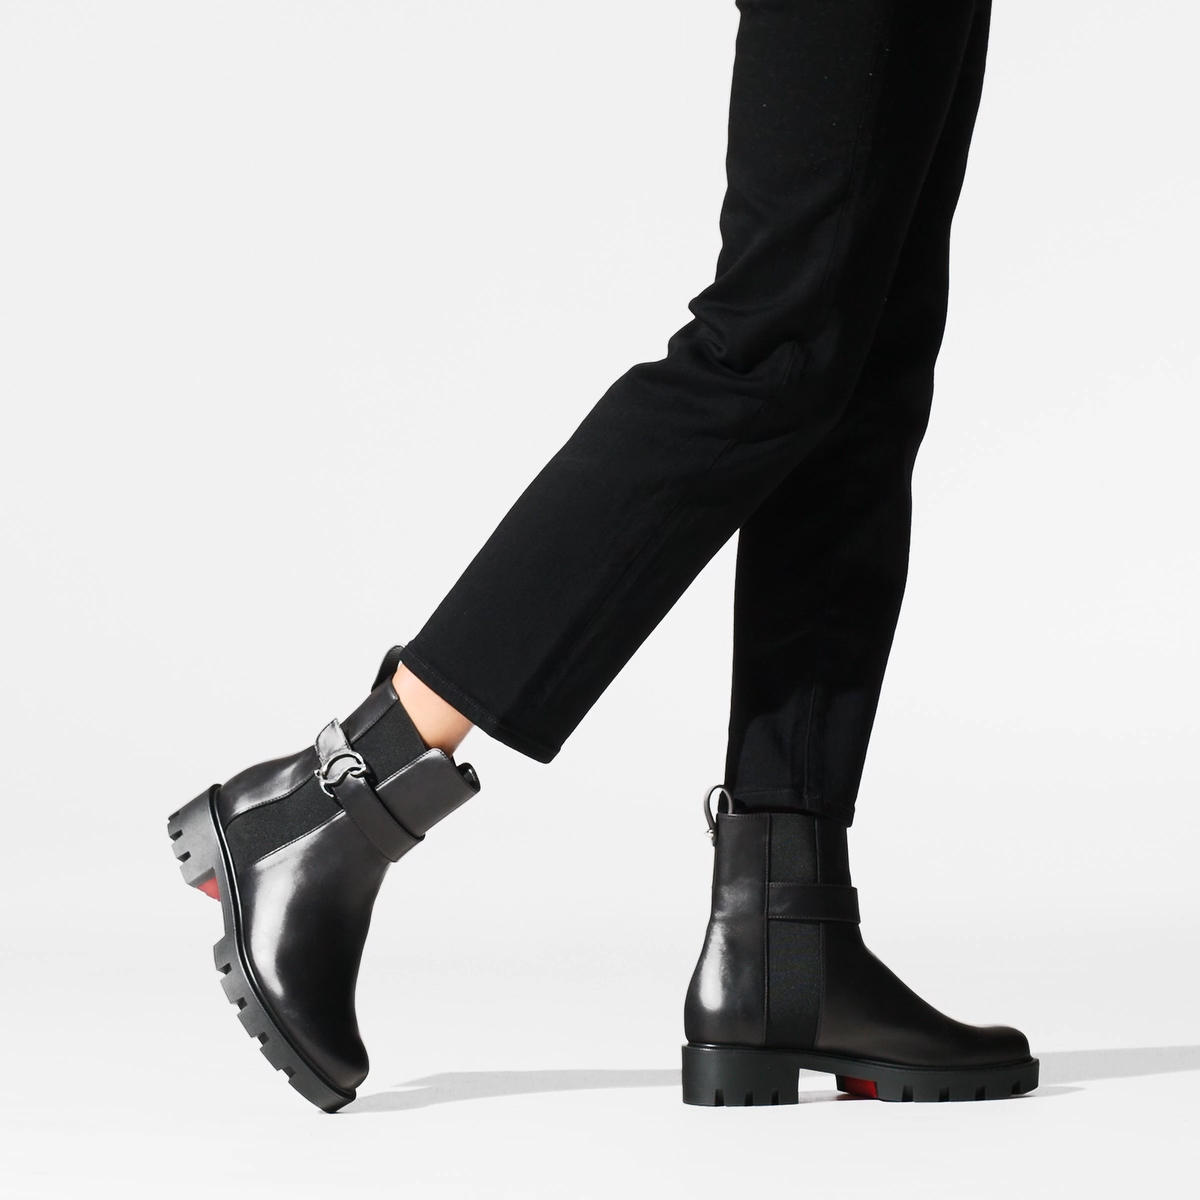 CL Chelsea Booty Lug - Low boots - Calf leather - Black - Christian  Louboutin